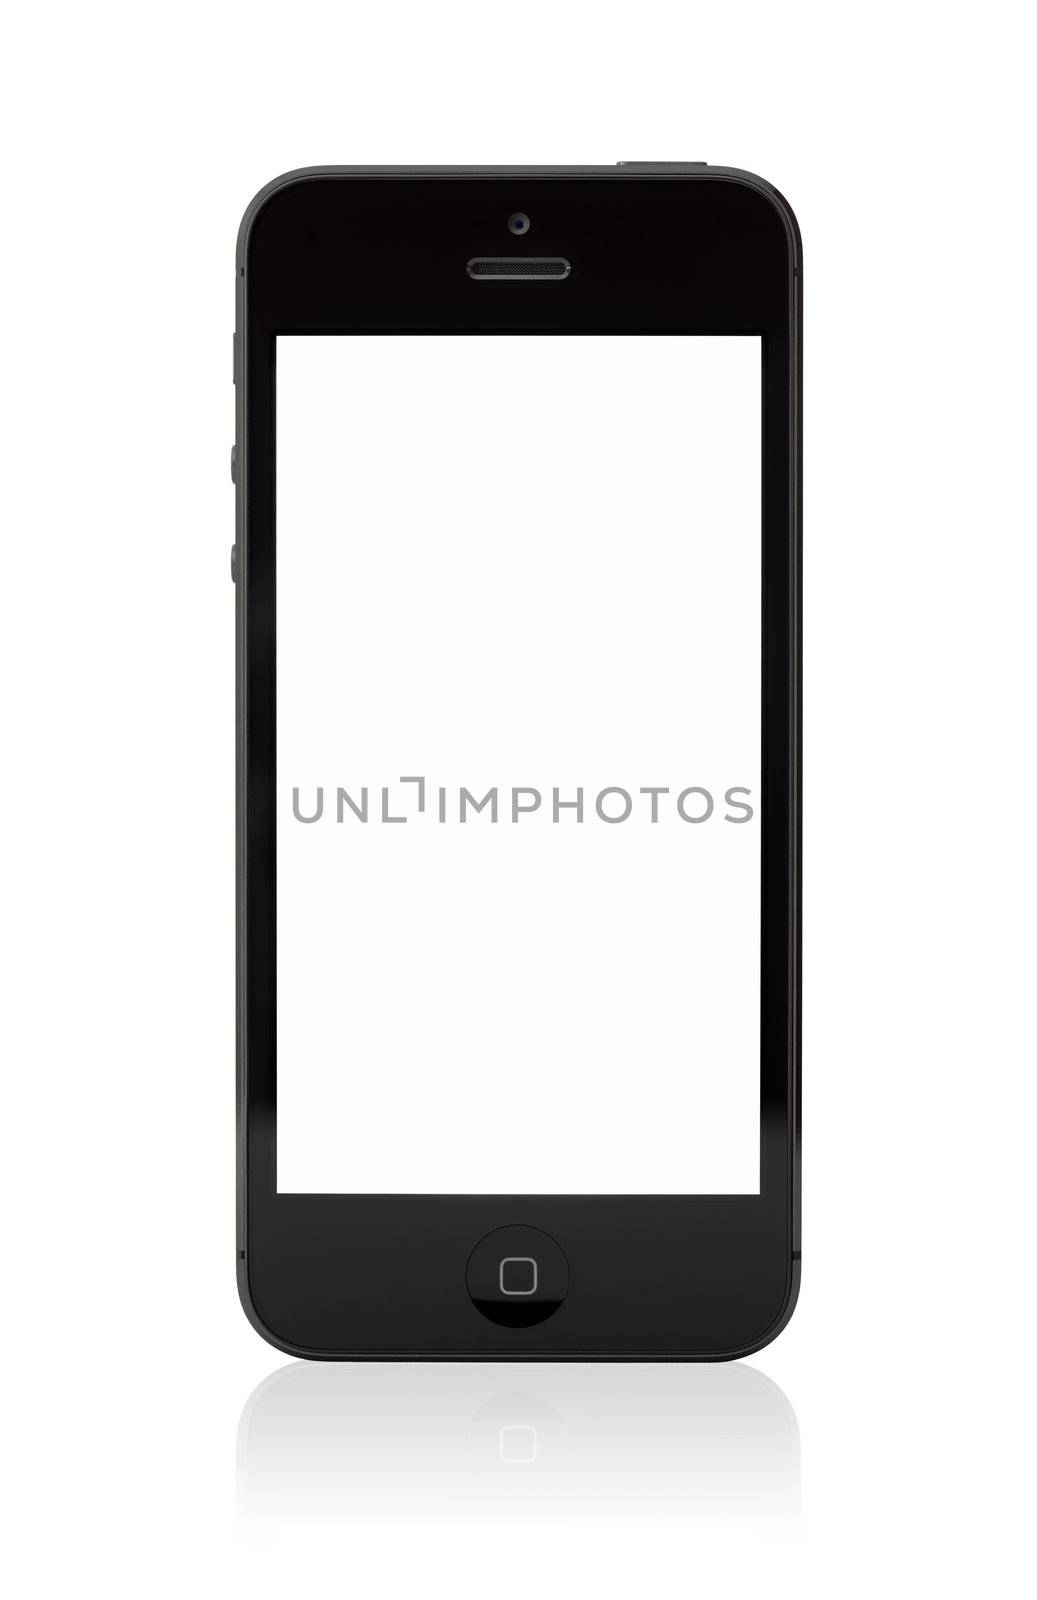 Apple iPhone 5 with blank screen by bloomua